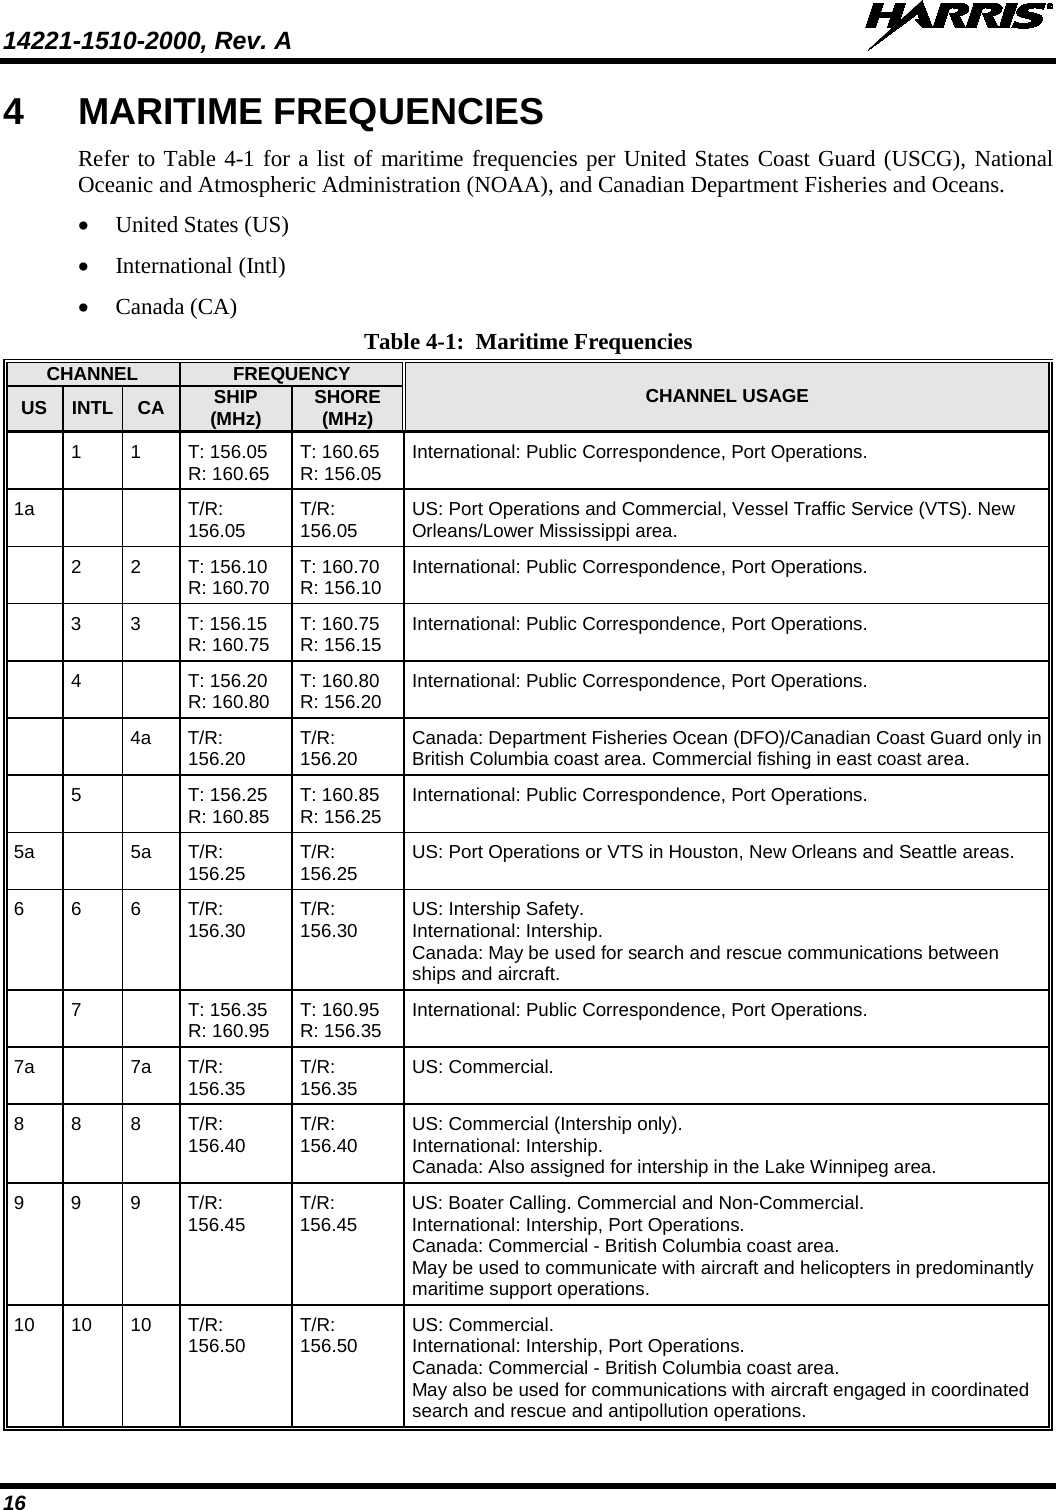 14221-1510-2000, Rev. A   16 4  MARITIME FREQUENCIES Refer to Table 4-1 for a list of maritime frequencies per United States Coast Guard (USCG), National Oceanic and Atmospheric Administration (NOAA), and Canadian Department Fisheries and Oceans. • United States (US) • International (Intl) • Canada (CA) Table 4-1:  Maritime Frequencies CHANNEL FREQUENCY CHANNEL USAGE US INTL CA SHIP (MHz) SHORE (MHz)  1 1 T: 156.05 R: 160.65 T: 160.65 R: 156.05 International: Public Correspondence, Port Operations. 1a      T/R: 156.05 T/R: 156.05 US: Port Operations and Commercial, Vessel Traffic Service (VTS). New Orleans/Lower Mississippi area.   2 2 T: 156.10 R: 160.70 T: 160.70  R: 156.10 International: Public Correspondence, Port Operations.   3  3  T: 156.15 R: 160.75 T: 160.75 R: 156.15 International: Public Correspondence, Port Operations.  4  T: 156.20  R: 160.80 T: 160.80  R: 156.20 International: Public Correspondence, Port Operations.     4a T/R: 156.20 T/R: 156.20 Canada: Department Fisheries Ocean (DFO)/Canadian Coast Guard only in British Columbia coast area. Commercial fishing in east coast area.  5  T: 156.25  R: 160.85 T: 160.85  R: 156.25 International: Public Correspondence, Port Operations. 5a  5a T/R: 156.25 T/R: 156.25 US: Port Operations or VTS in Houston, New Orleans and Seattle areas. 6 6 6 T/R: 156.30 T/R: 156.30 US: Intership Safety. International: Intership. Canada: May be used for search and rescue communications between ships and aircraft.  7  T: 156.35  R: 160.95 T: 160.95  R: 156.35 International: Public Correspondence, Port Operations. 7a    7a T/R: 156.35 T/R: 156.35 US: Commercial. 8 8 8 T/R: 156.40 T/R: 156.40 US: Commercial (Intership only). International: Intership. Canada: Also assigned for intership in the Lake Winnipeg area. 9  9  9  T/R: 156.45 T/R: 156.45 US: Boater Calling. Commercial and Non-Commercial. International: Intership, Port Operations. Canada: Commercial - British Columbia coast area. May be used to communicate with aircraft and helicopters in predominantly maritime support operations. 10 10 10 T/R: 156.50 T/R: 156.50 US: Commercial. International: Intership, Port Operations. Canada: Commercial - British Columbia coast area. May also be used for communications with aircraft engaged in coordinated search and rescue and antipollution operations. 